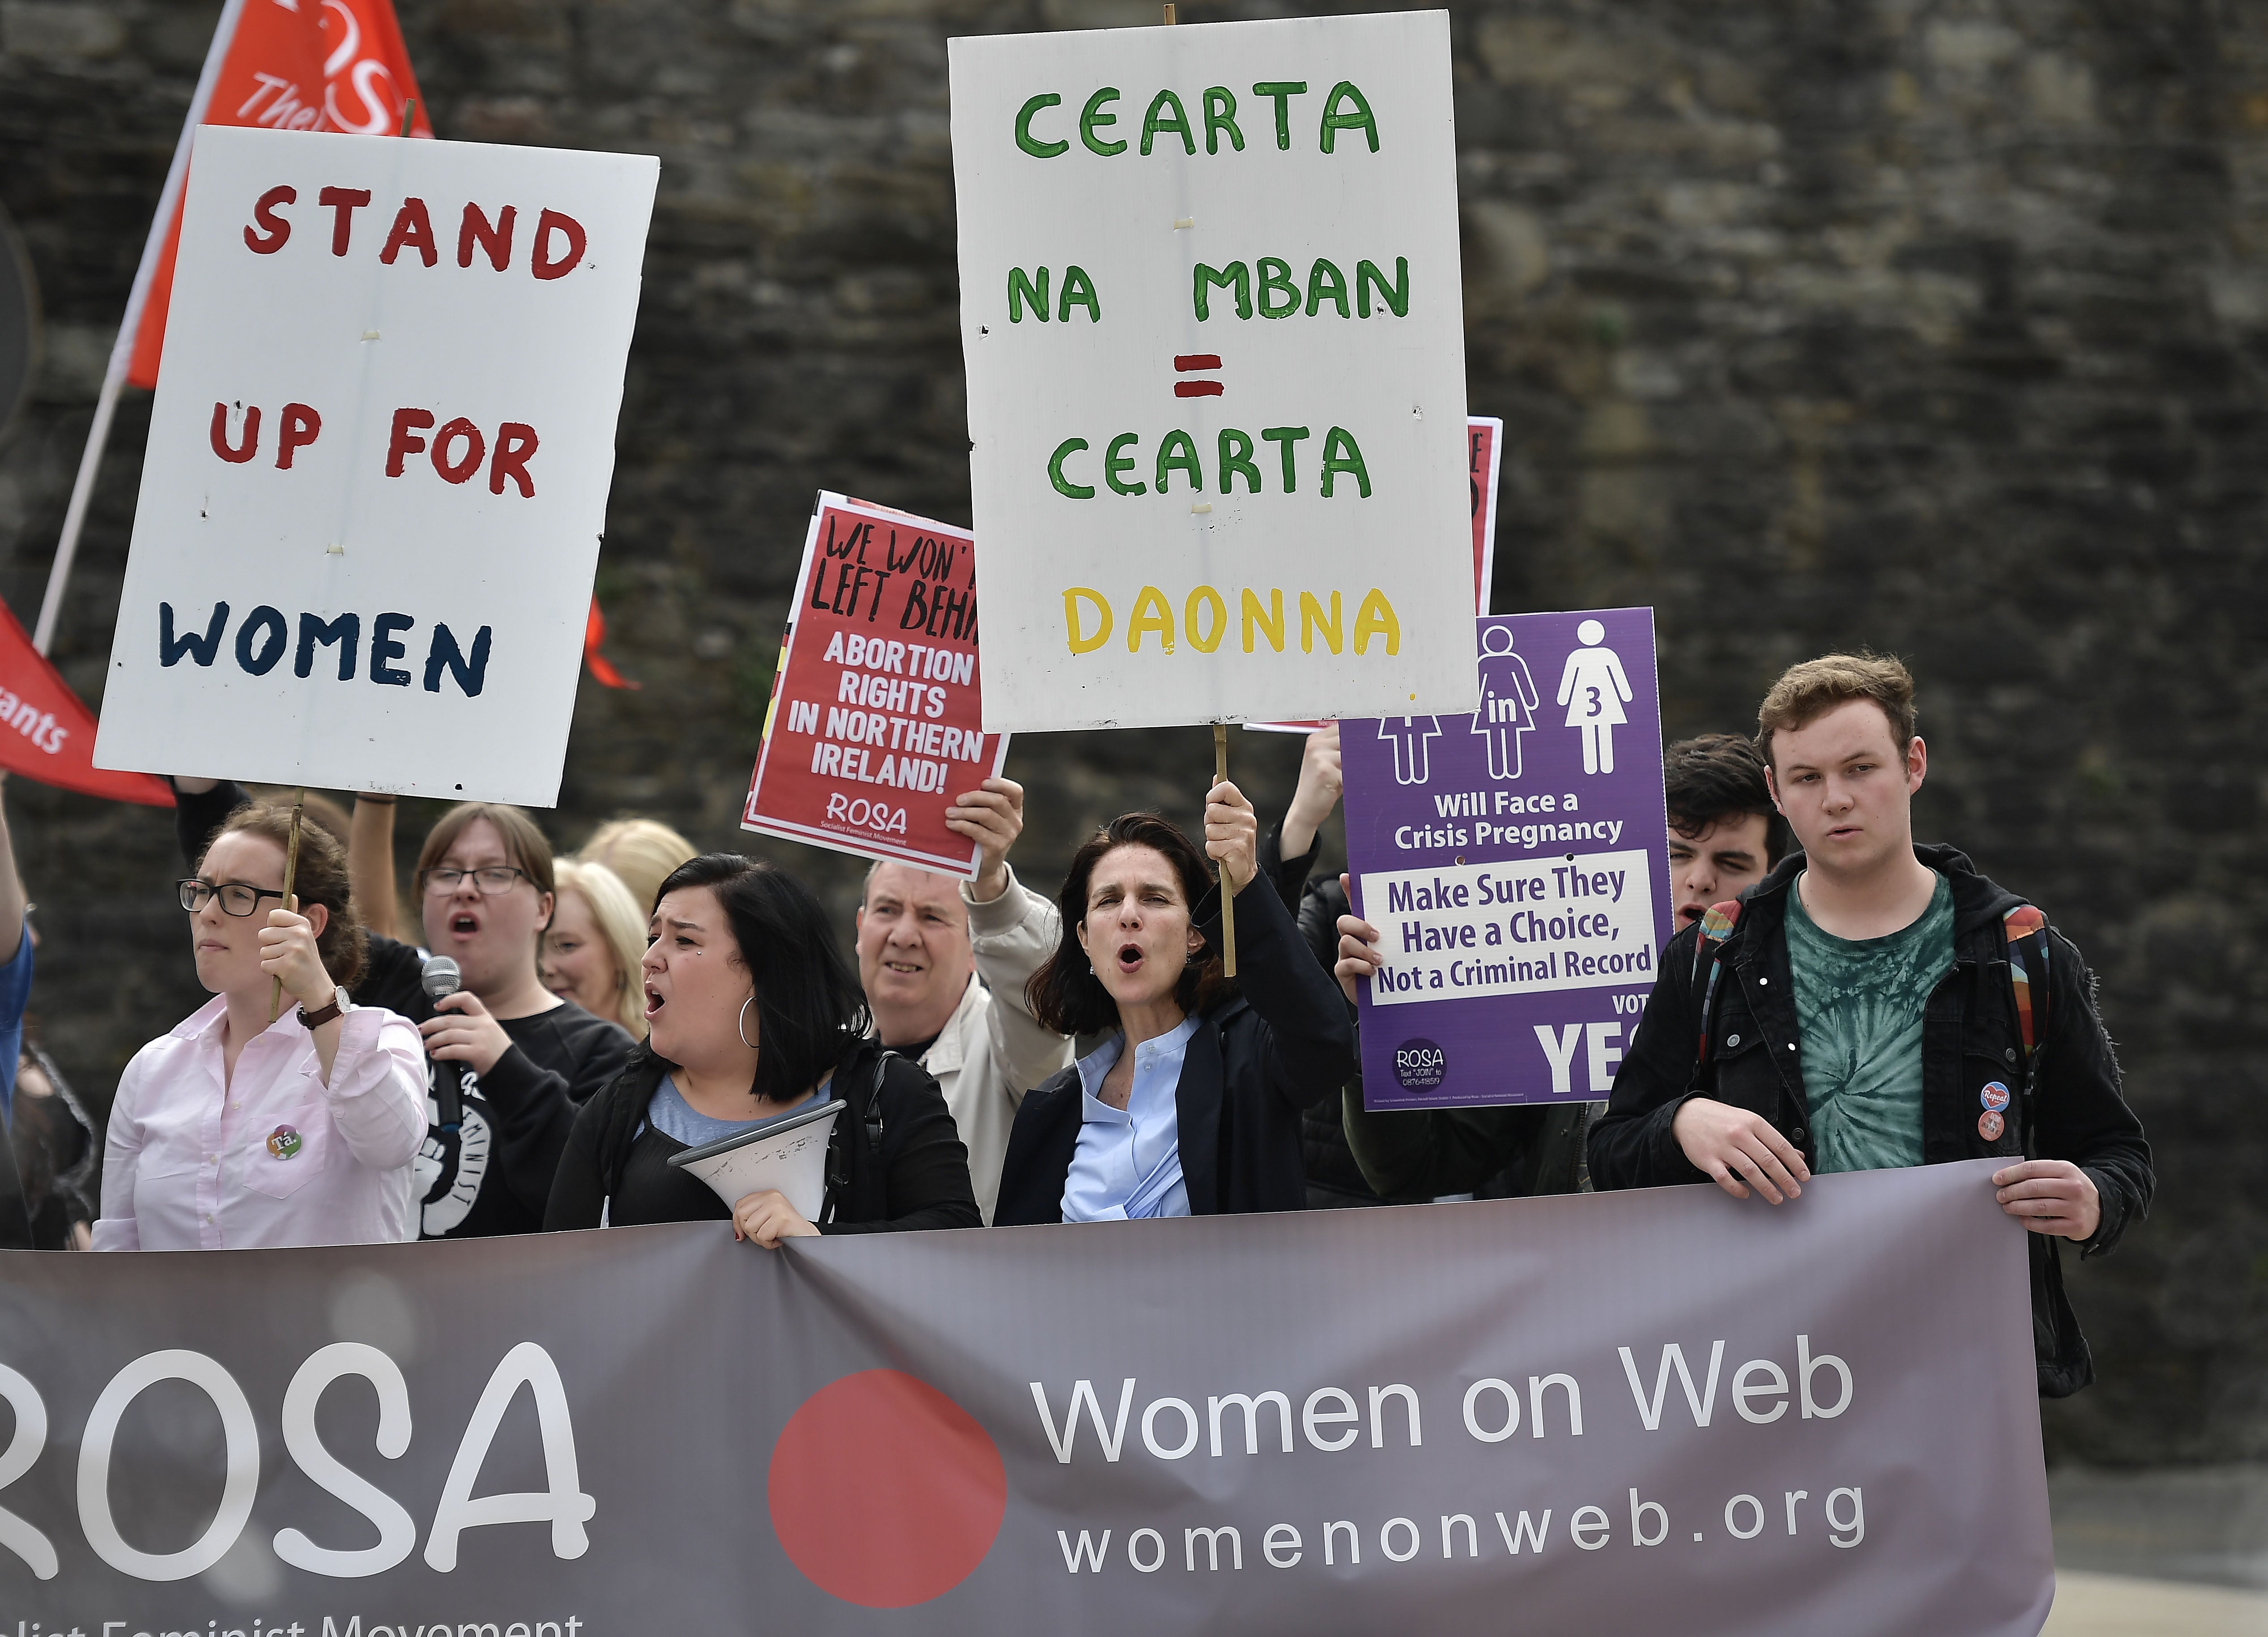 Rebecca Gomperts (2nd R) provided abortions for women in Ireland before law change in 2018